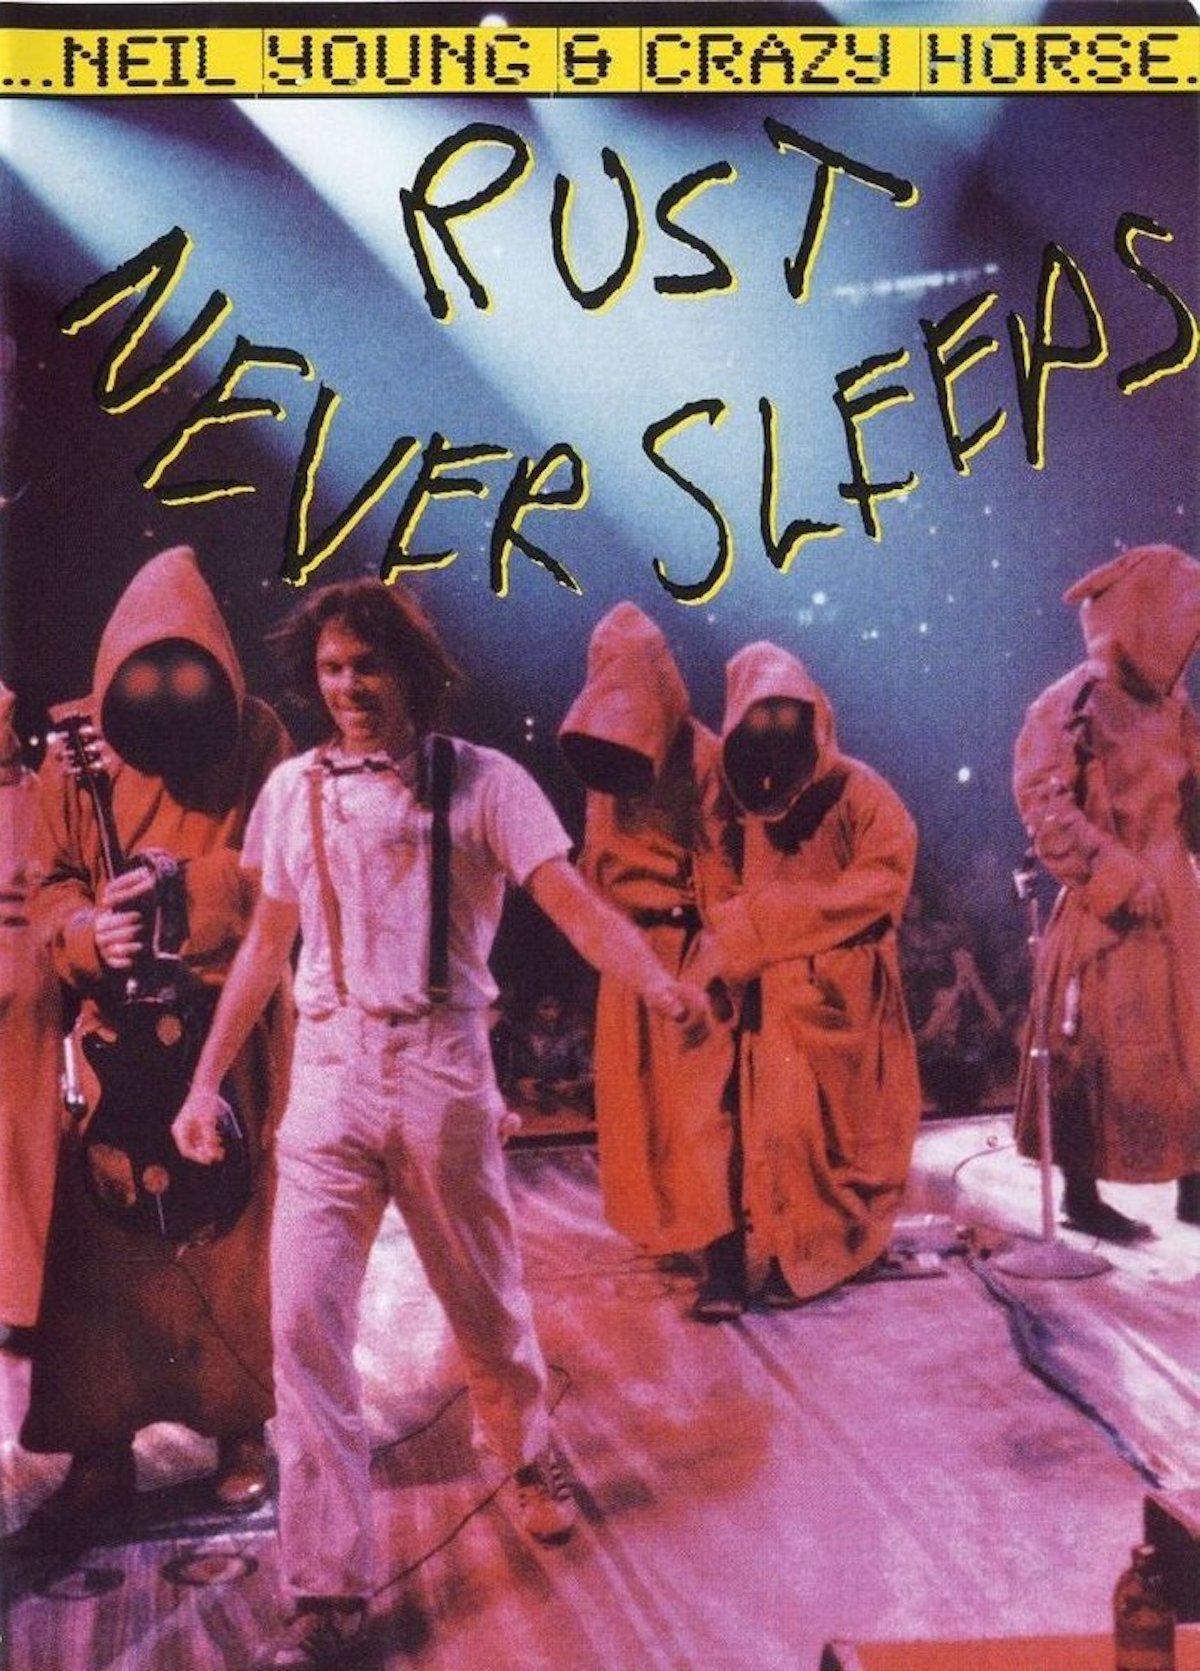 Classic DVD Review: Neil Young & Crazy Horse | Rust Never Sleeps